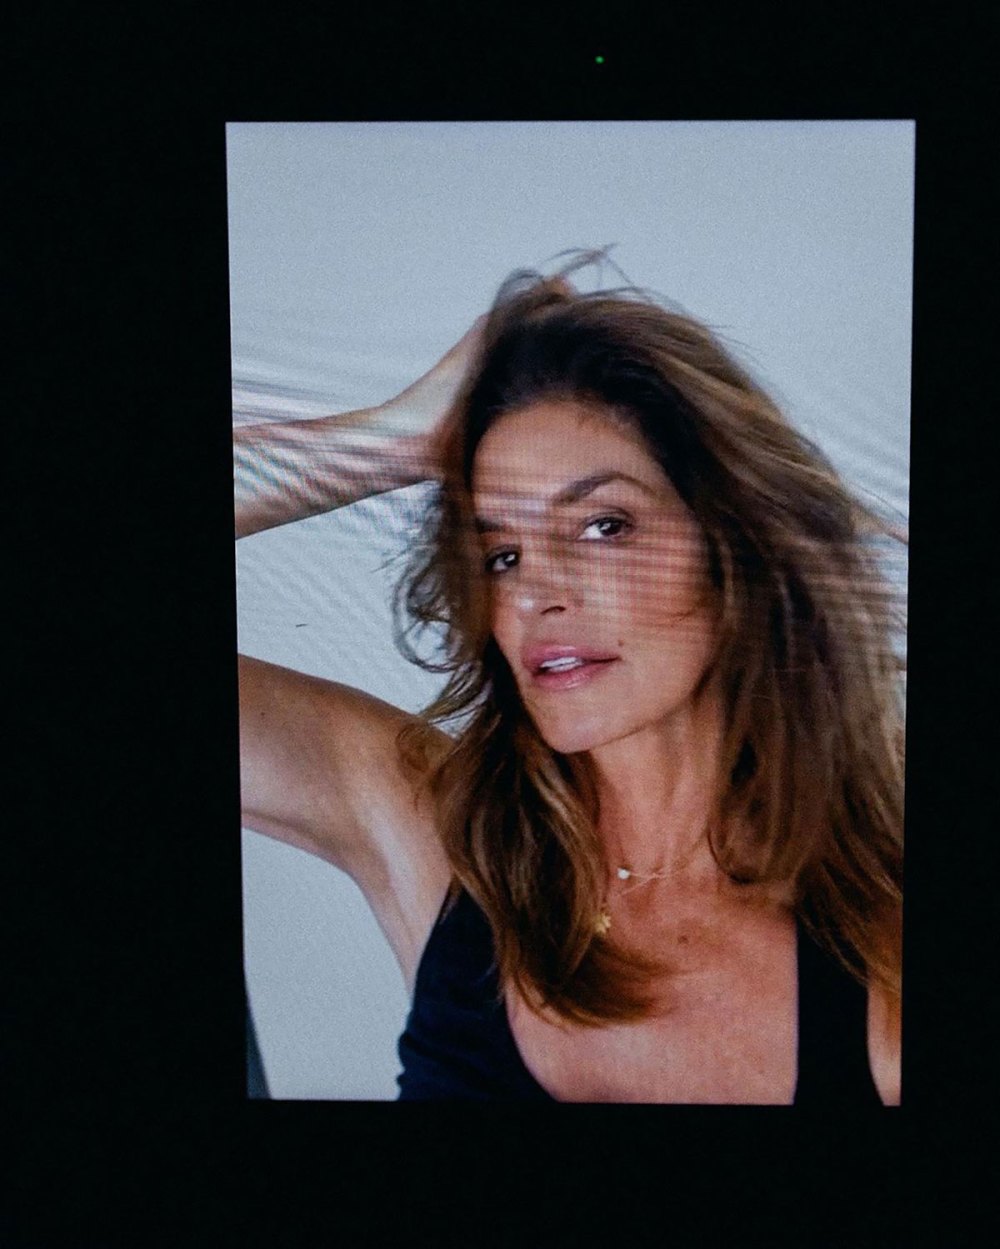 Cindy Crawford Does a New Kind of Photoshoot in Quarantine